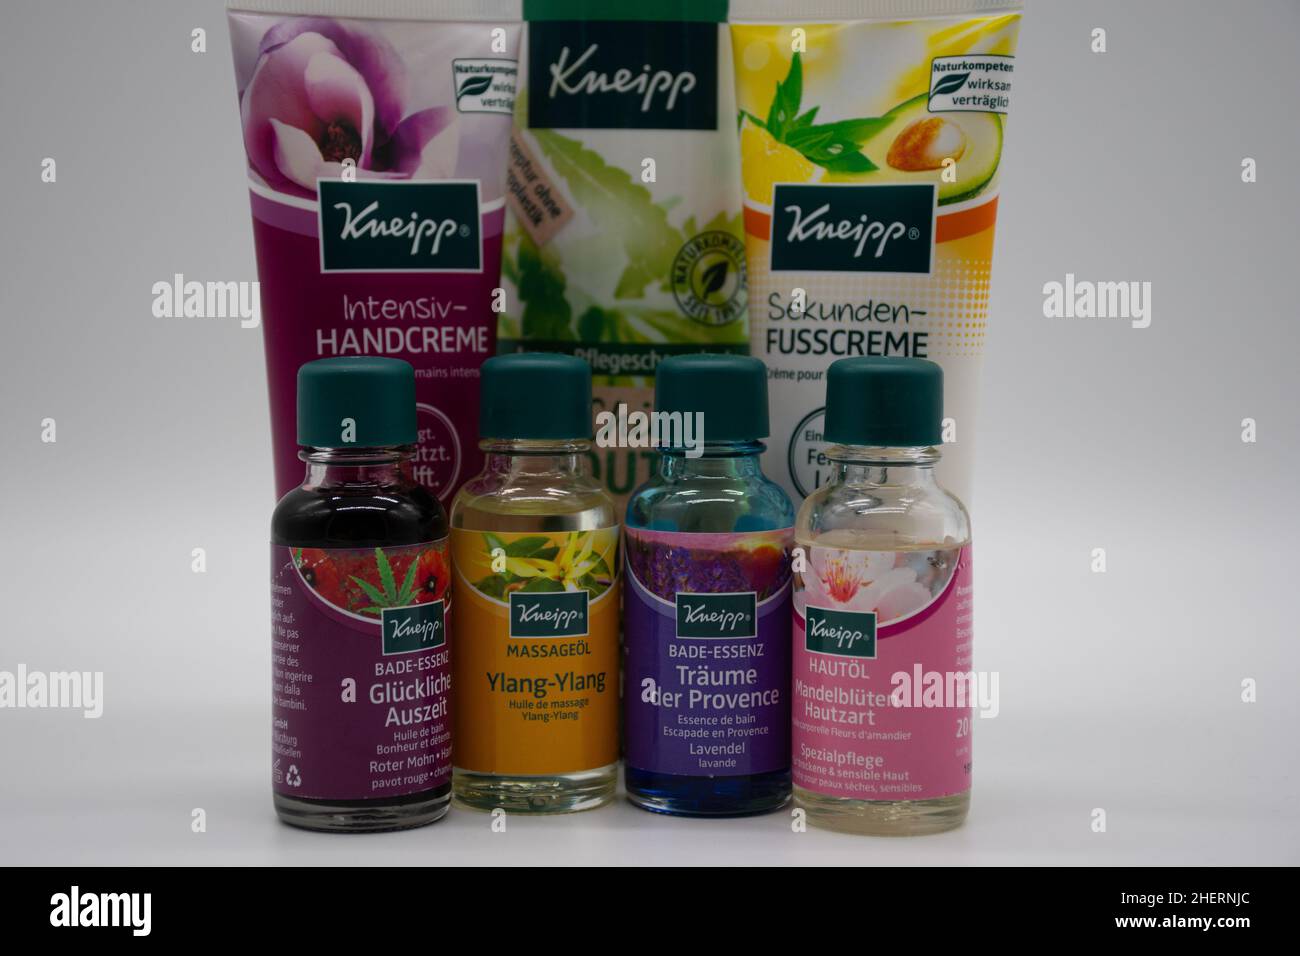 Page 8 - Brand Shampoo High Resolution Stock Photography and Images - Alamy